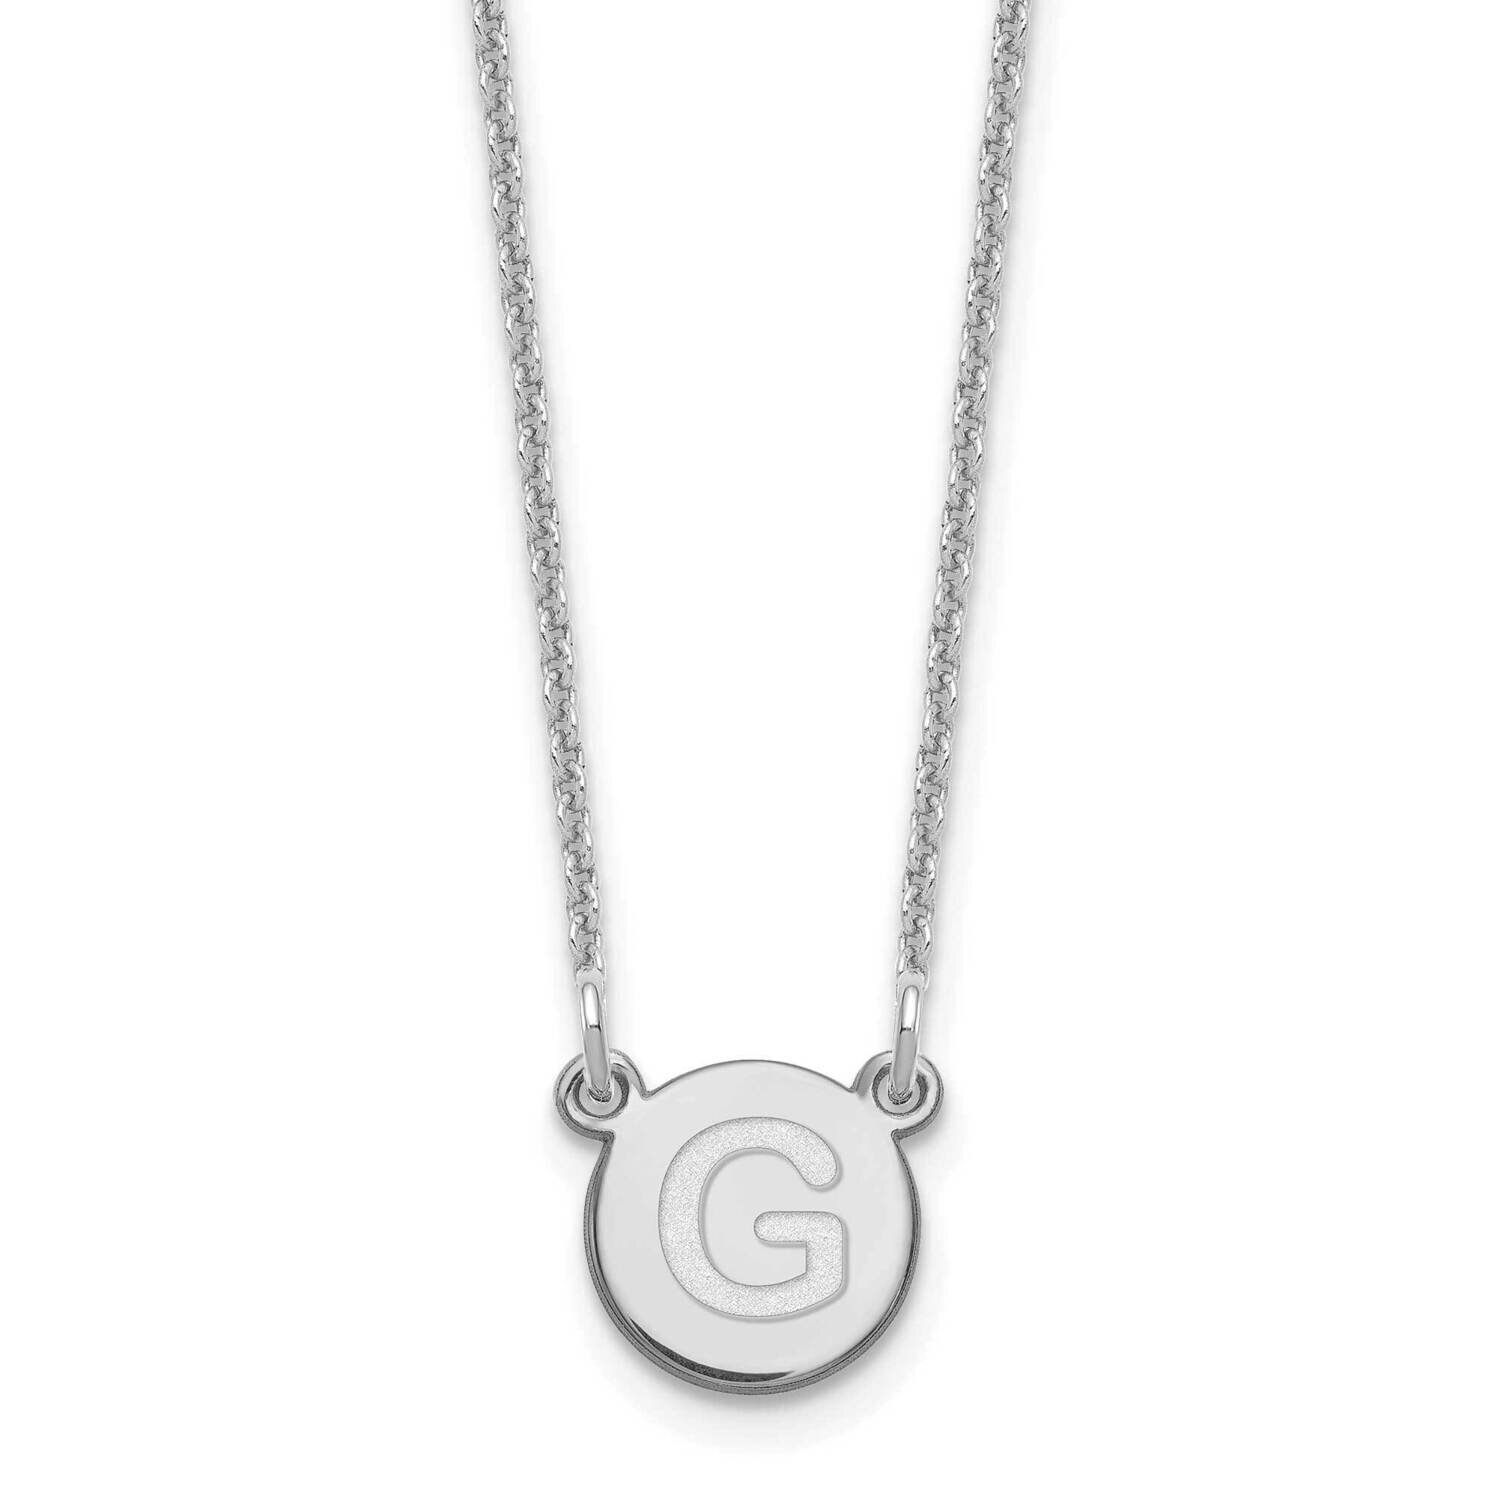 Tiny Circle Block Initial Letter G Necklace 14k White Gold XNA722W/G